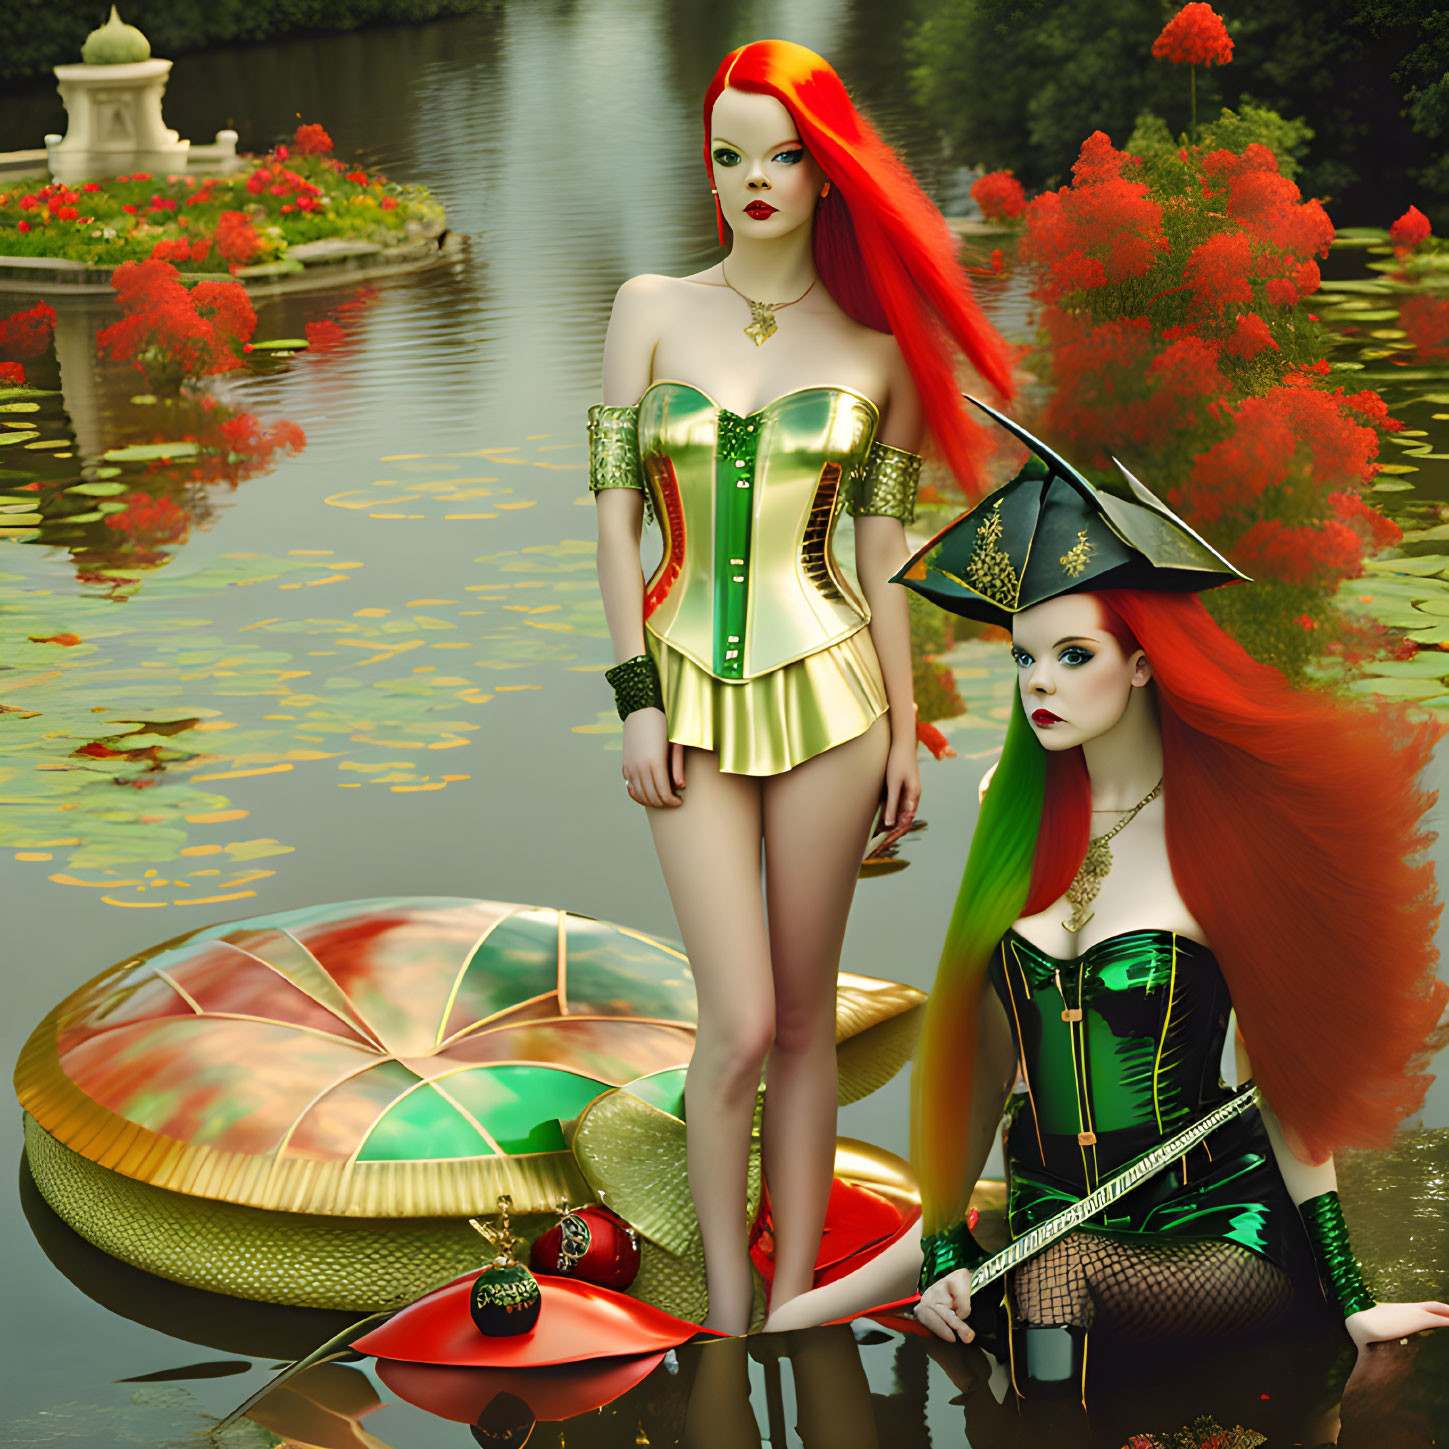 Two Women in Red Corset Dresses with Oversized Mushrooms in Fantasy Garden